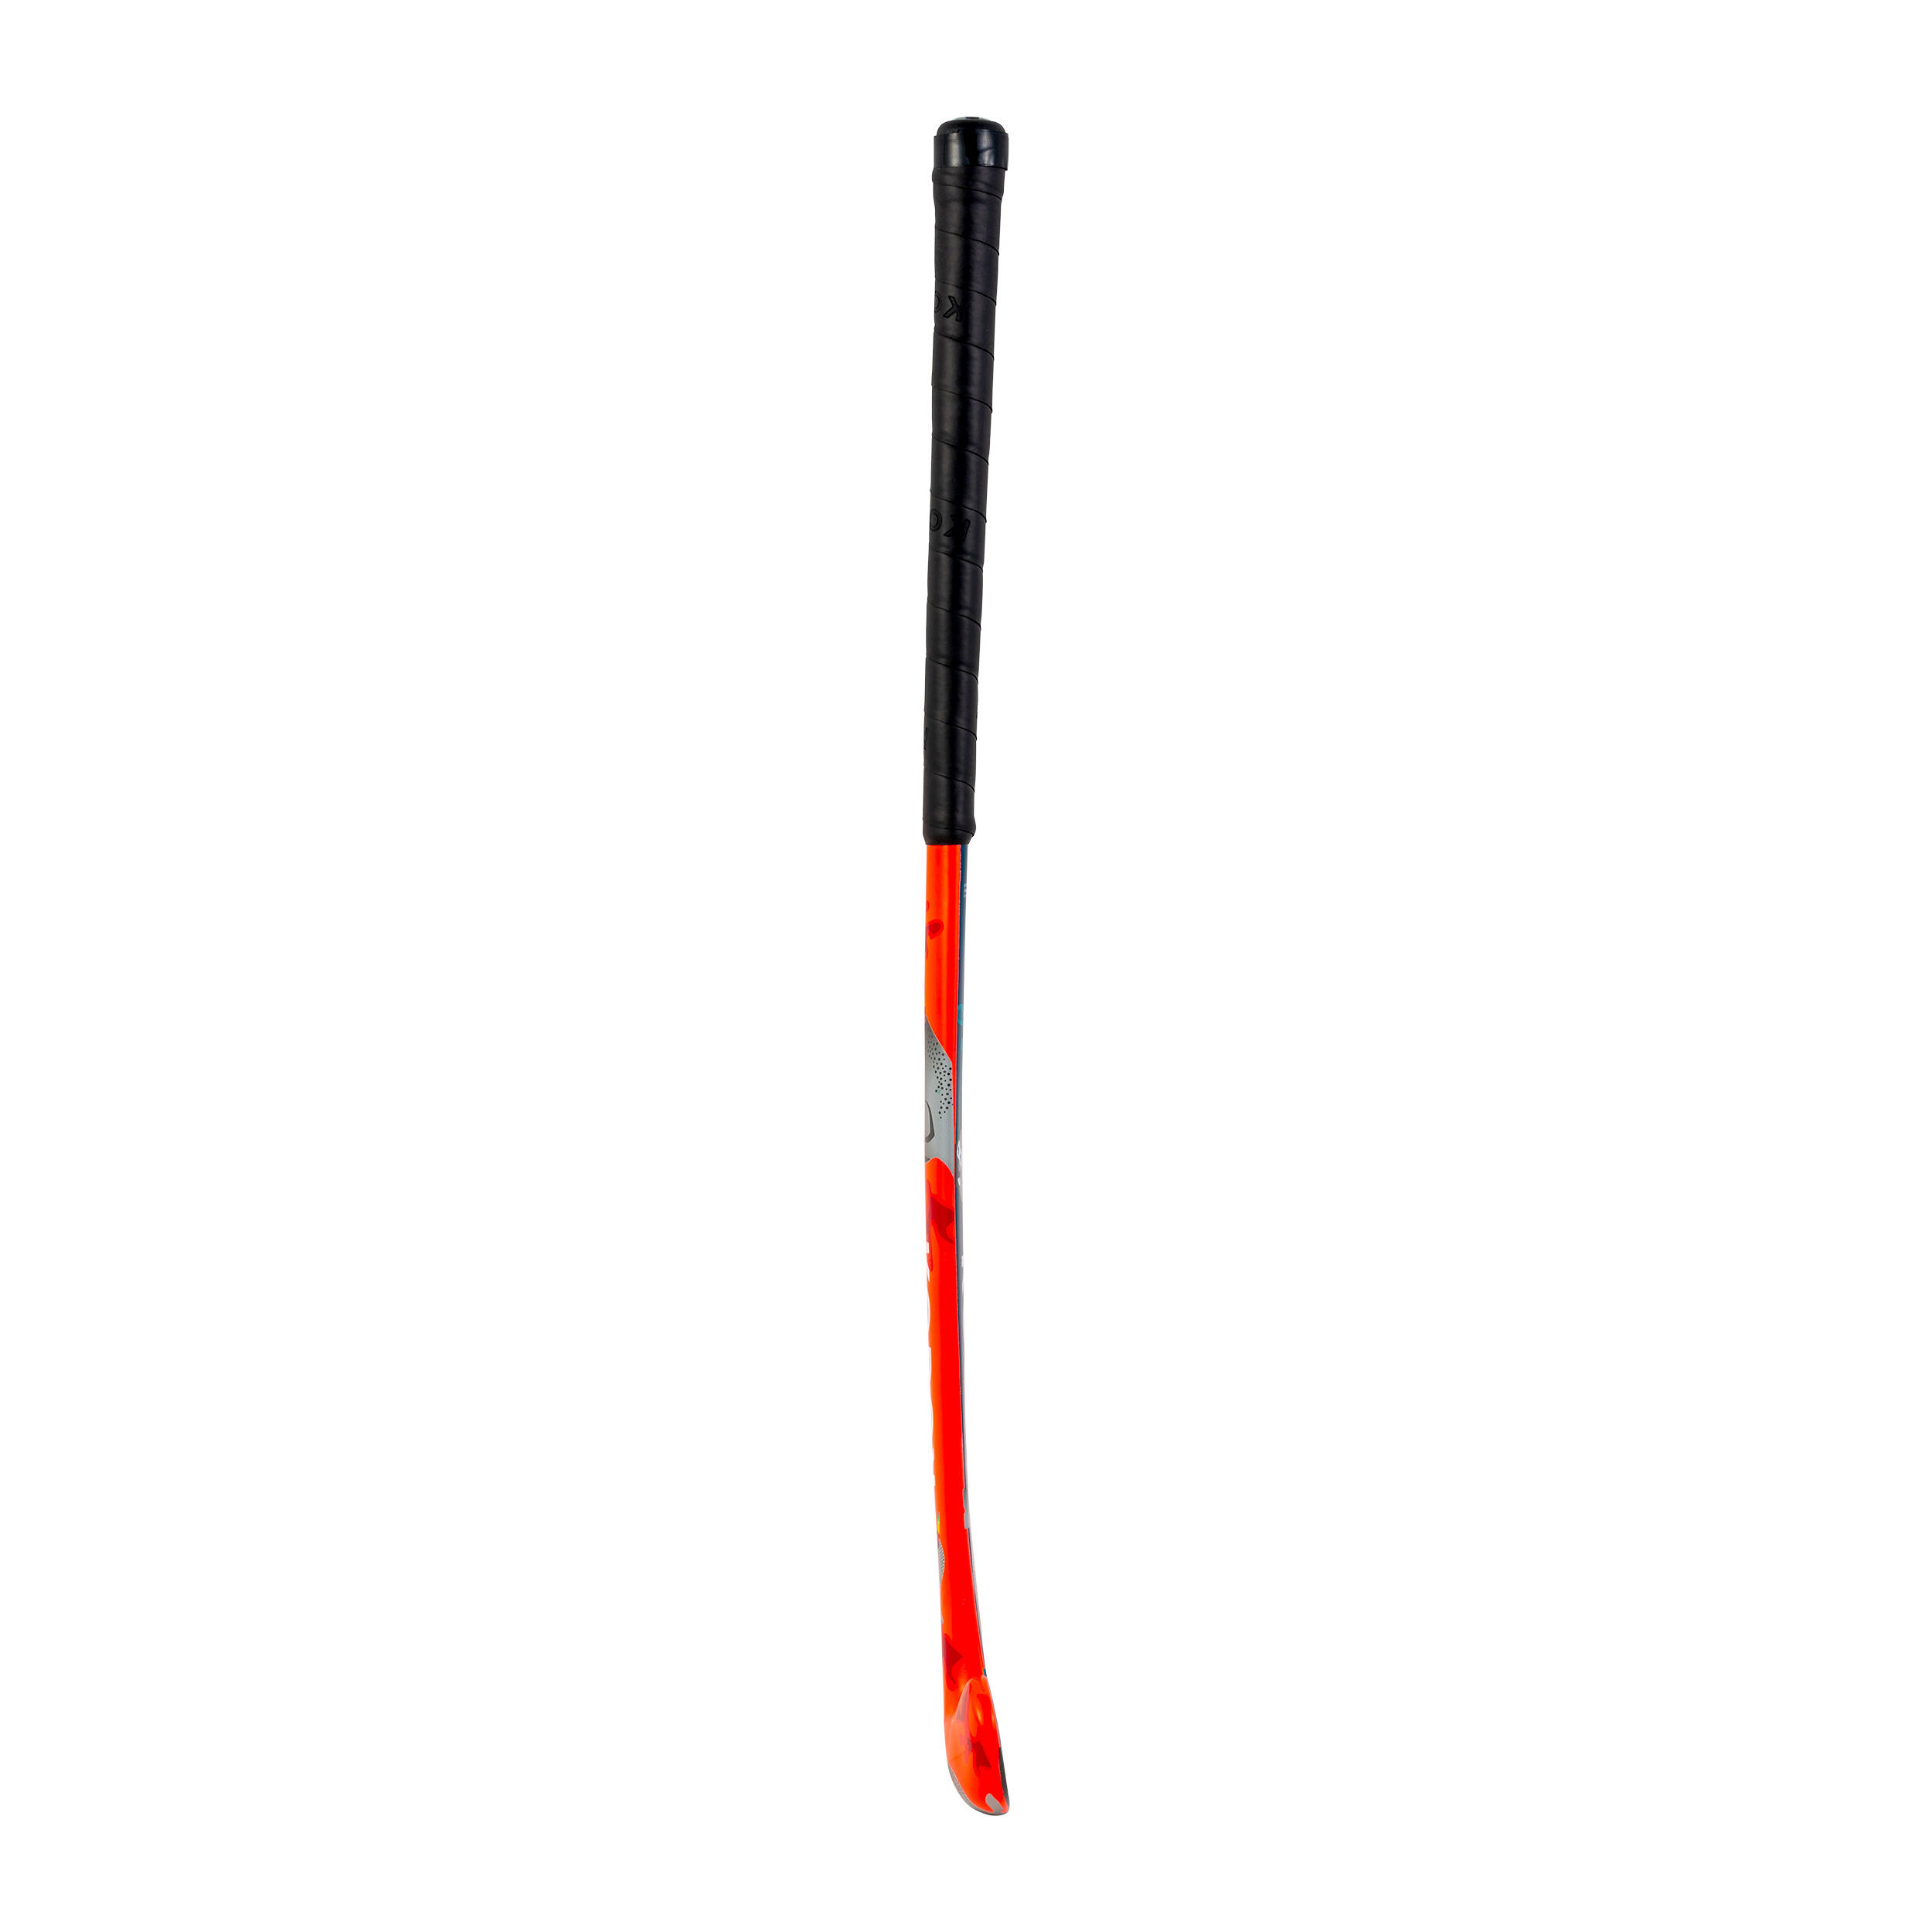 Kids' Wood Field Hockey Stick FH100 - Narwhal 9/11